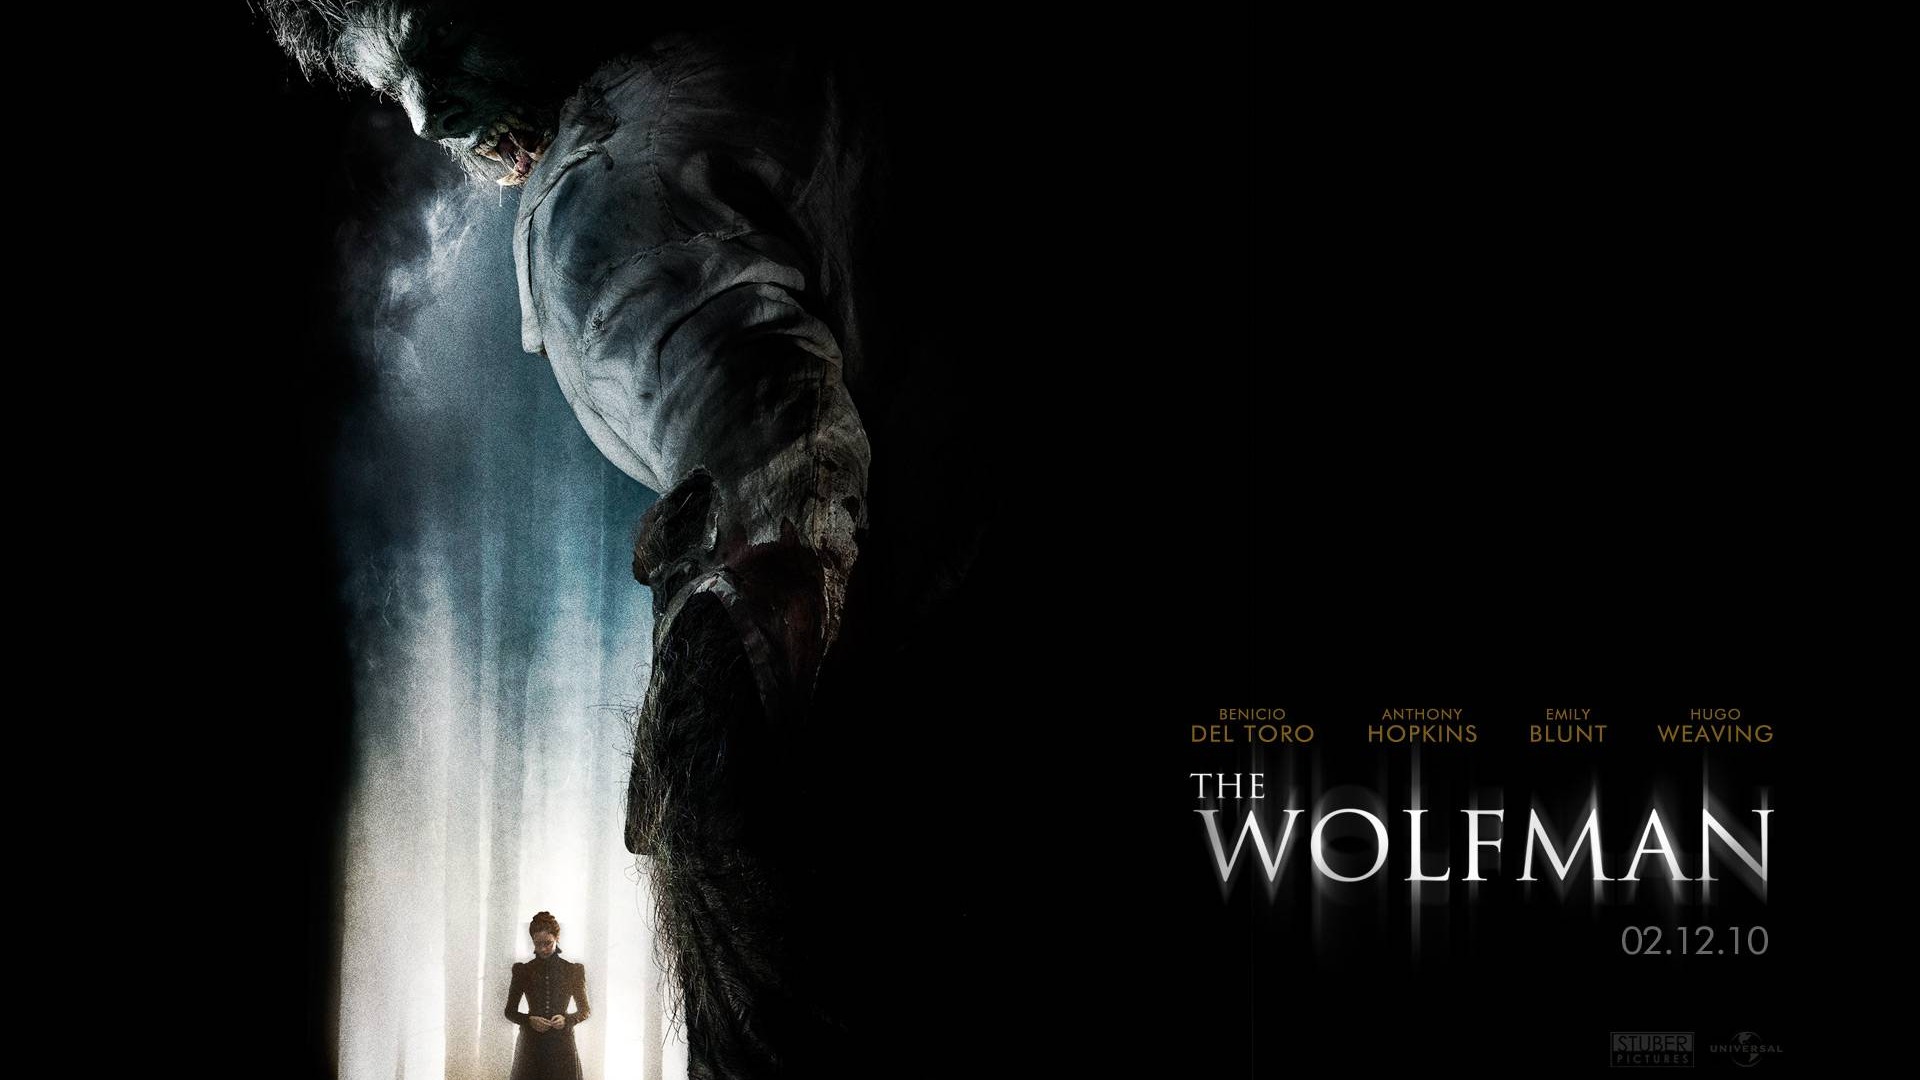 The Wolfman Movie Wallpapers #6 - 1920x1080